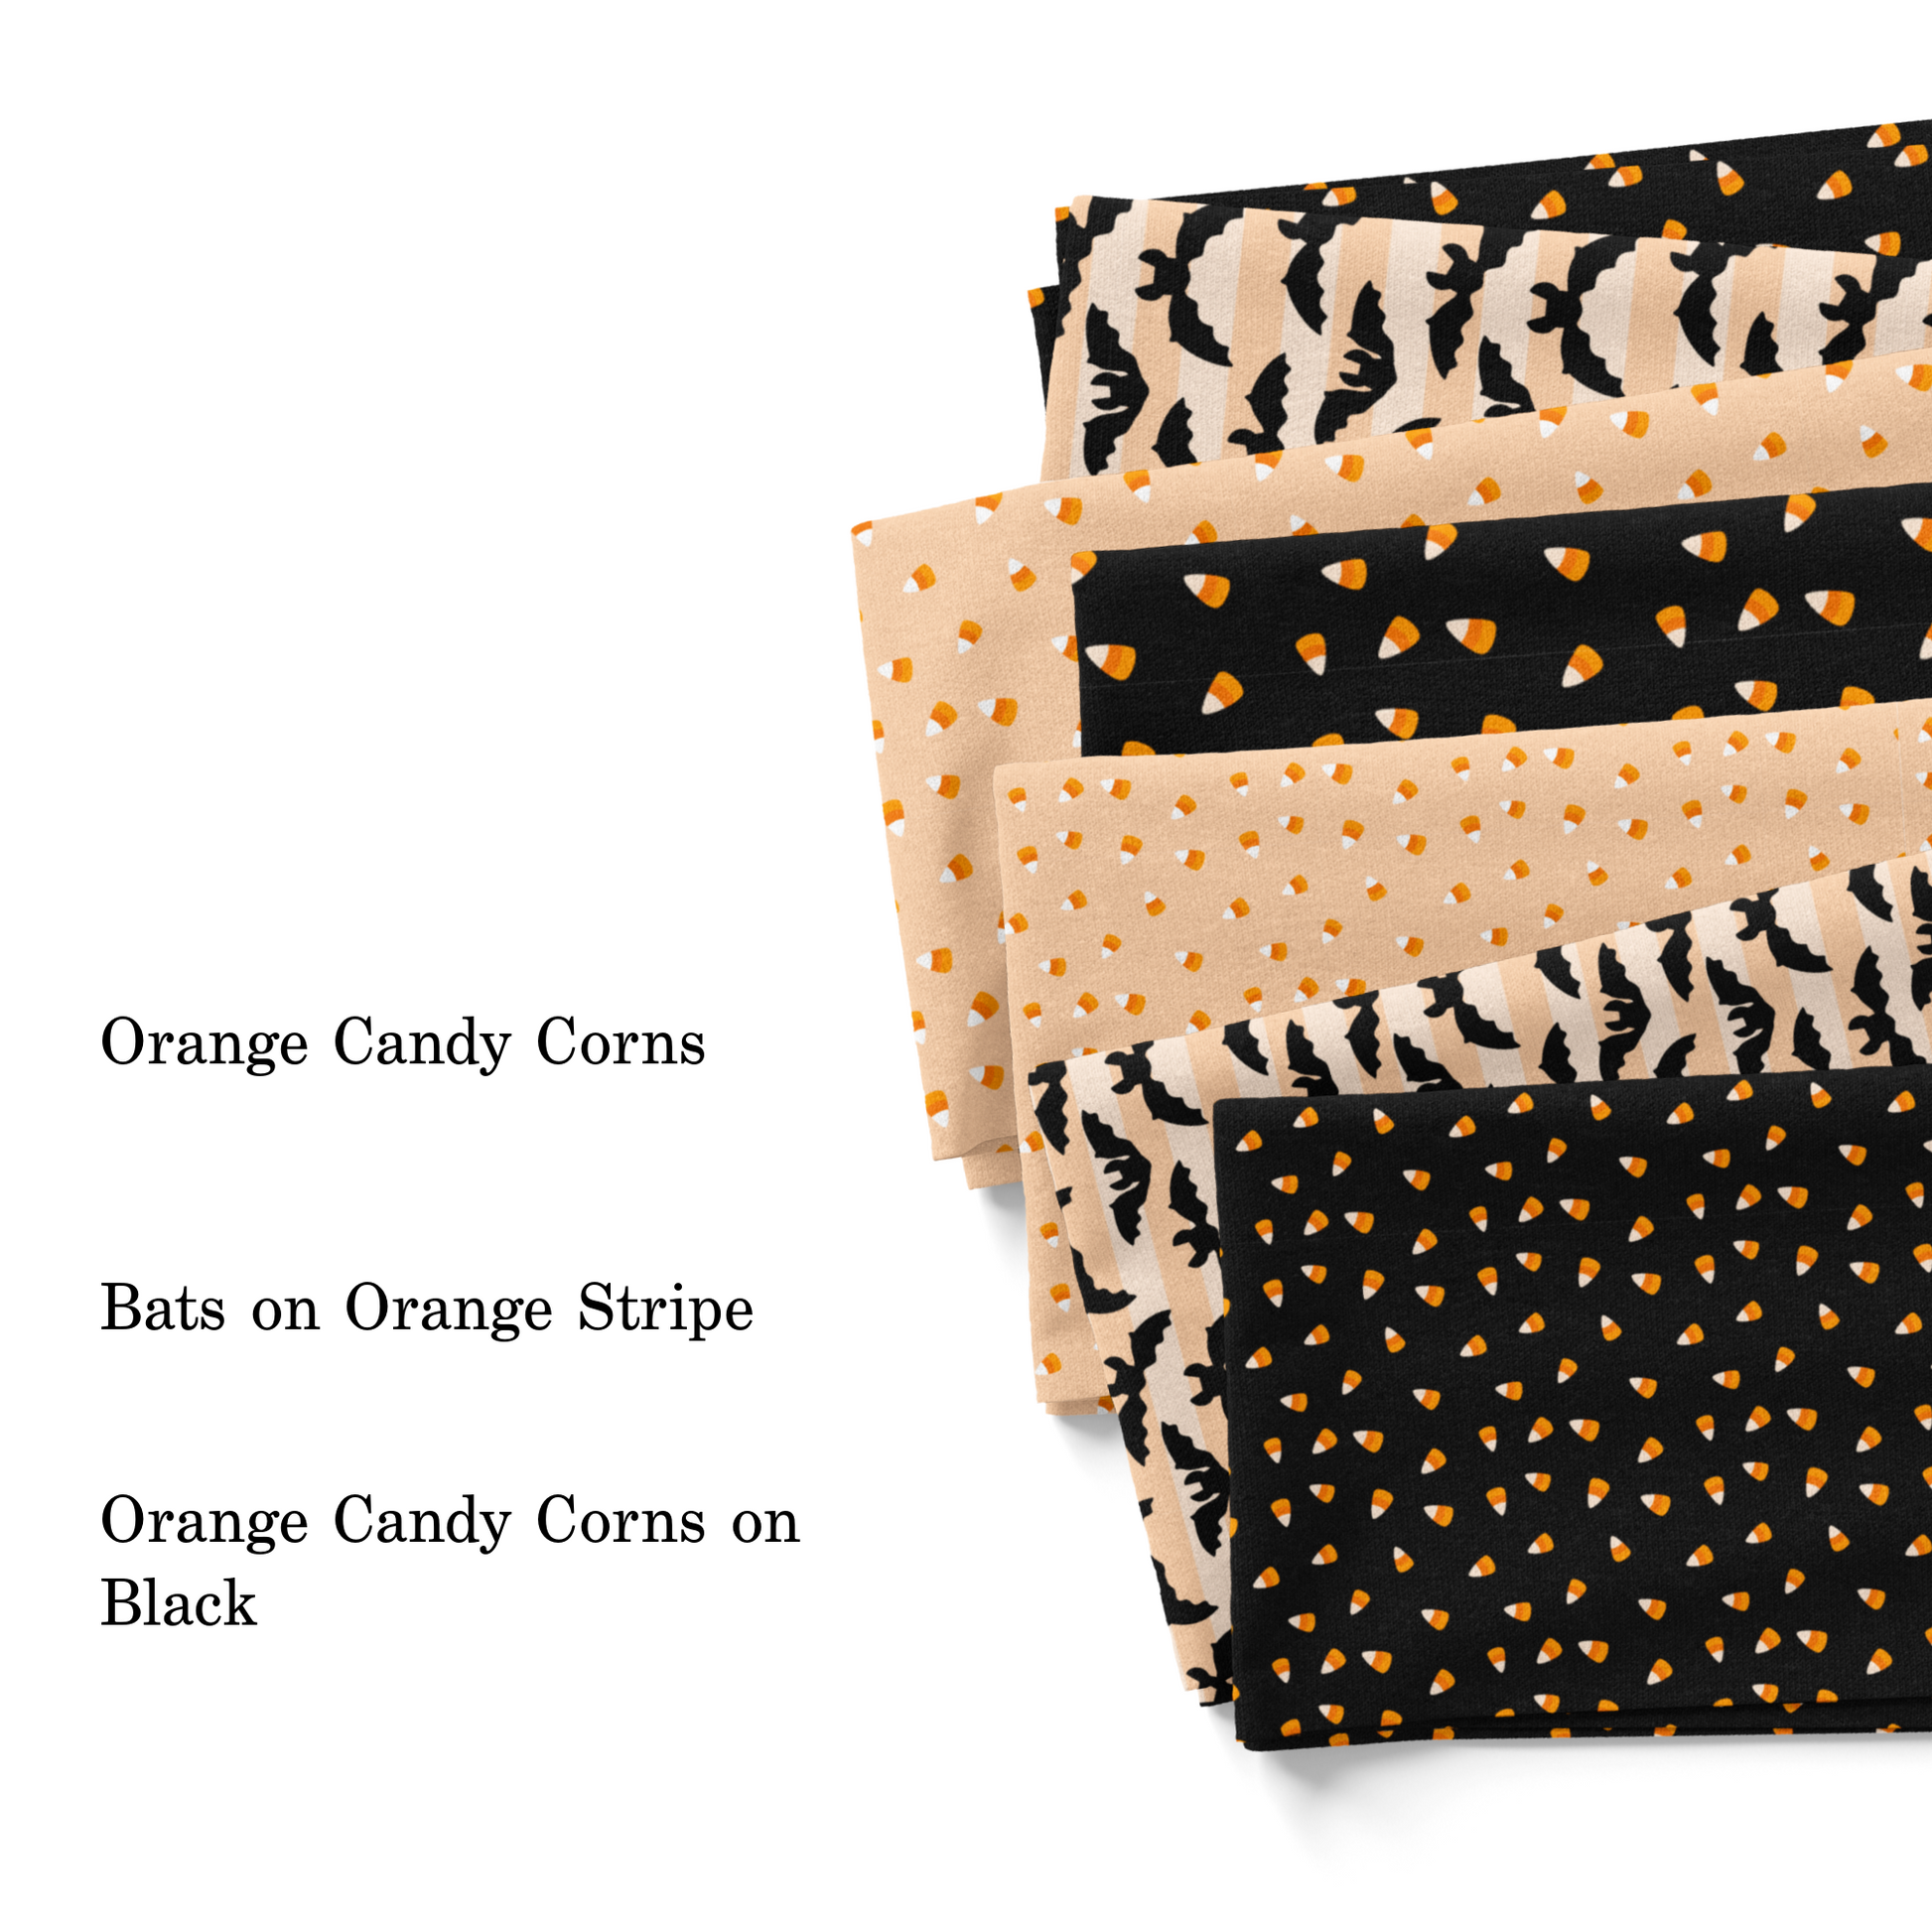 Black and orange Halloween fabric swatches with candy corn and bats.